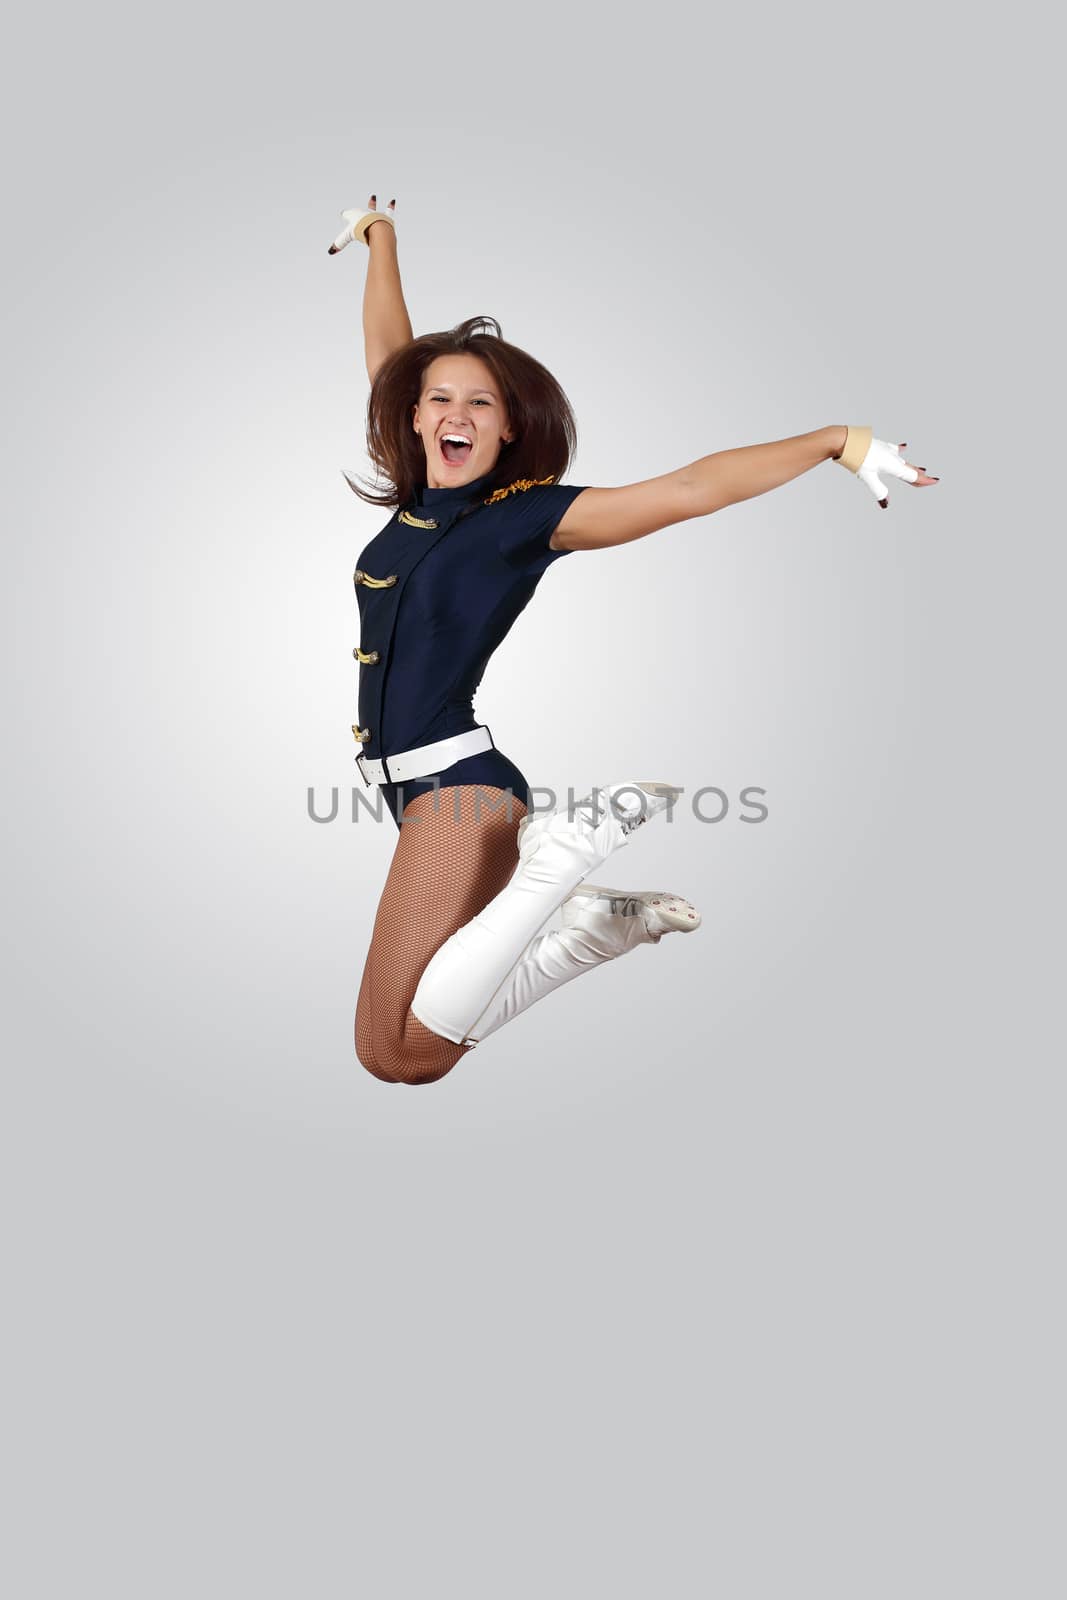 Young female dancer jumping against white background